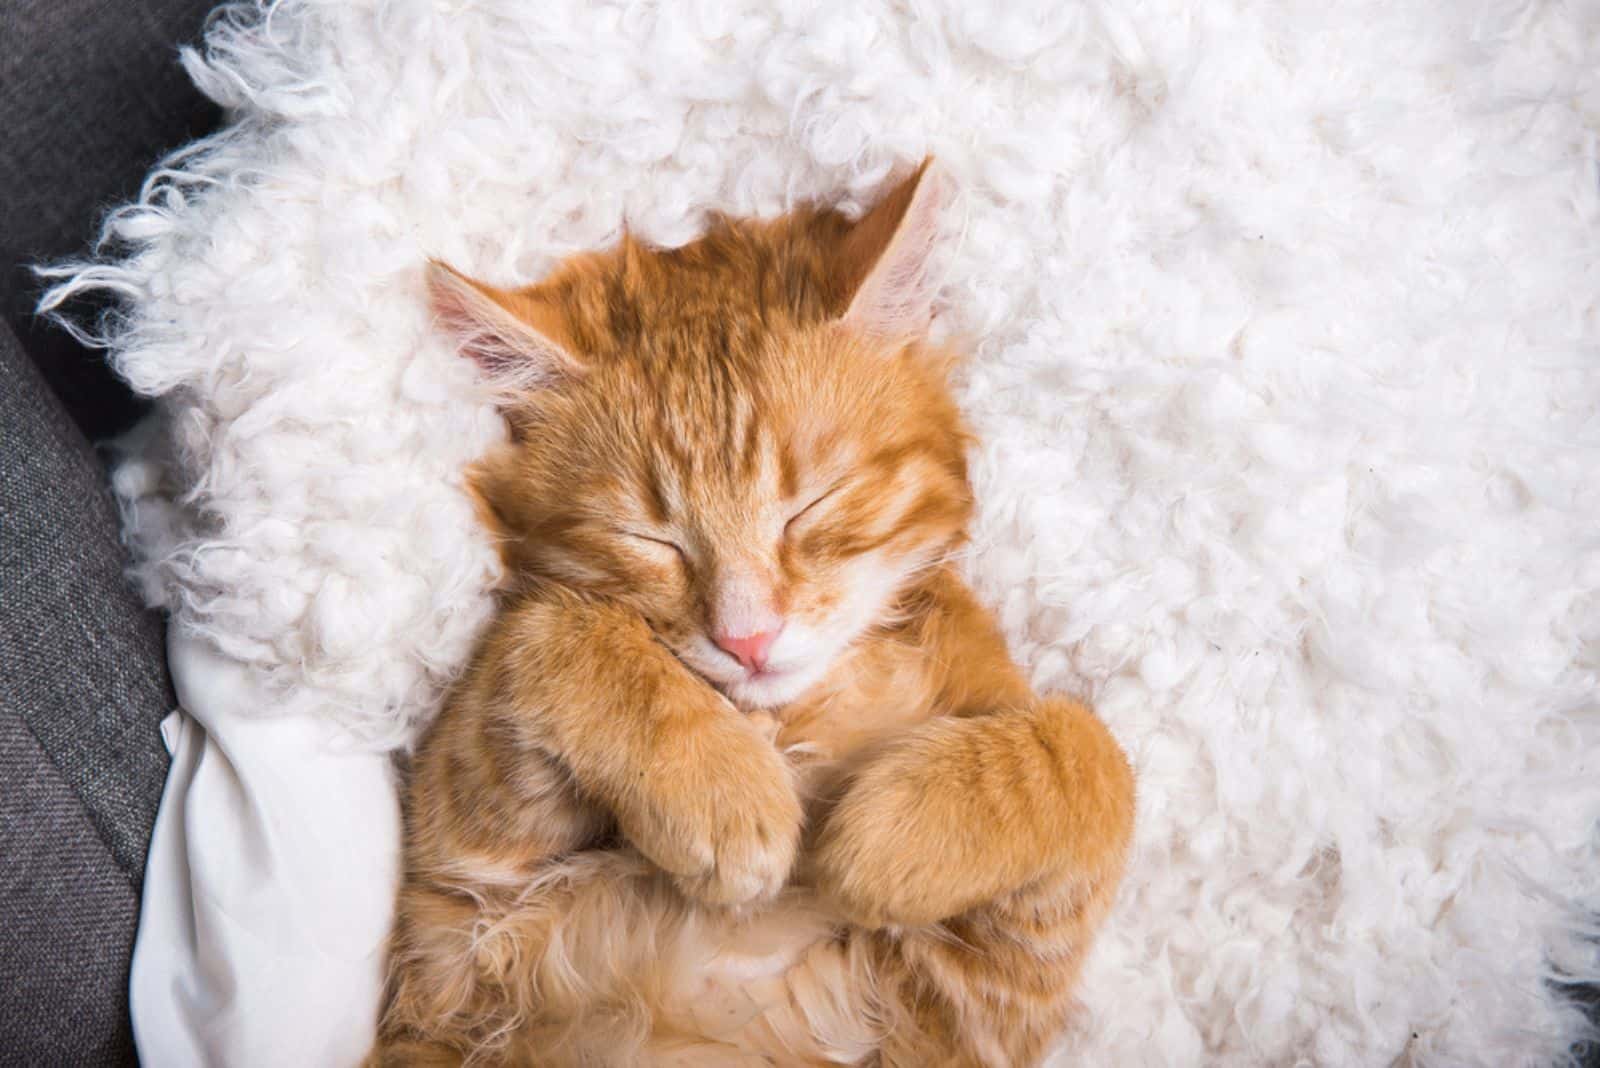 Ginger cat sleeps in funny pose.